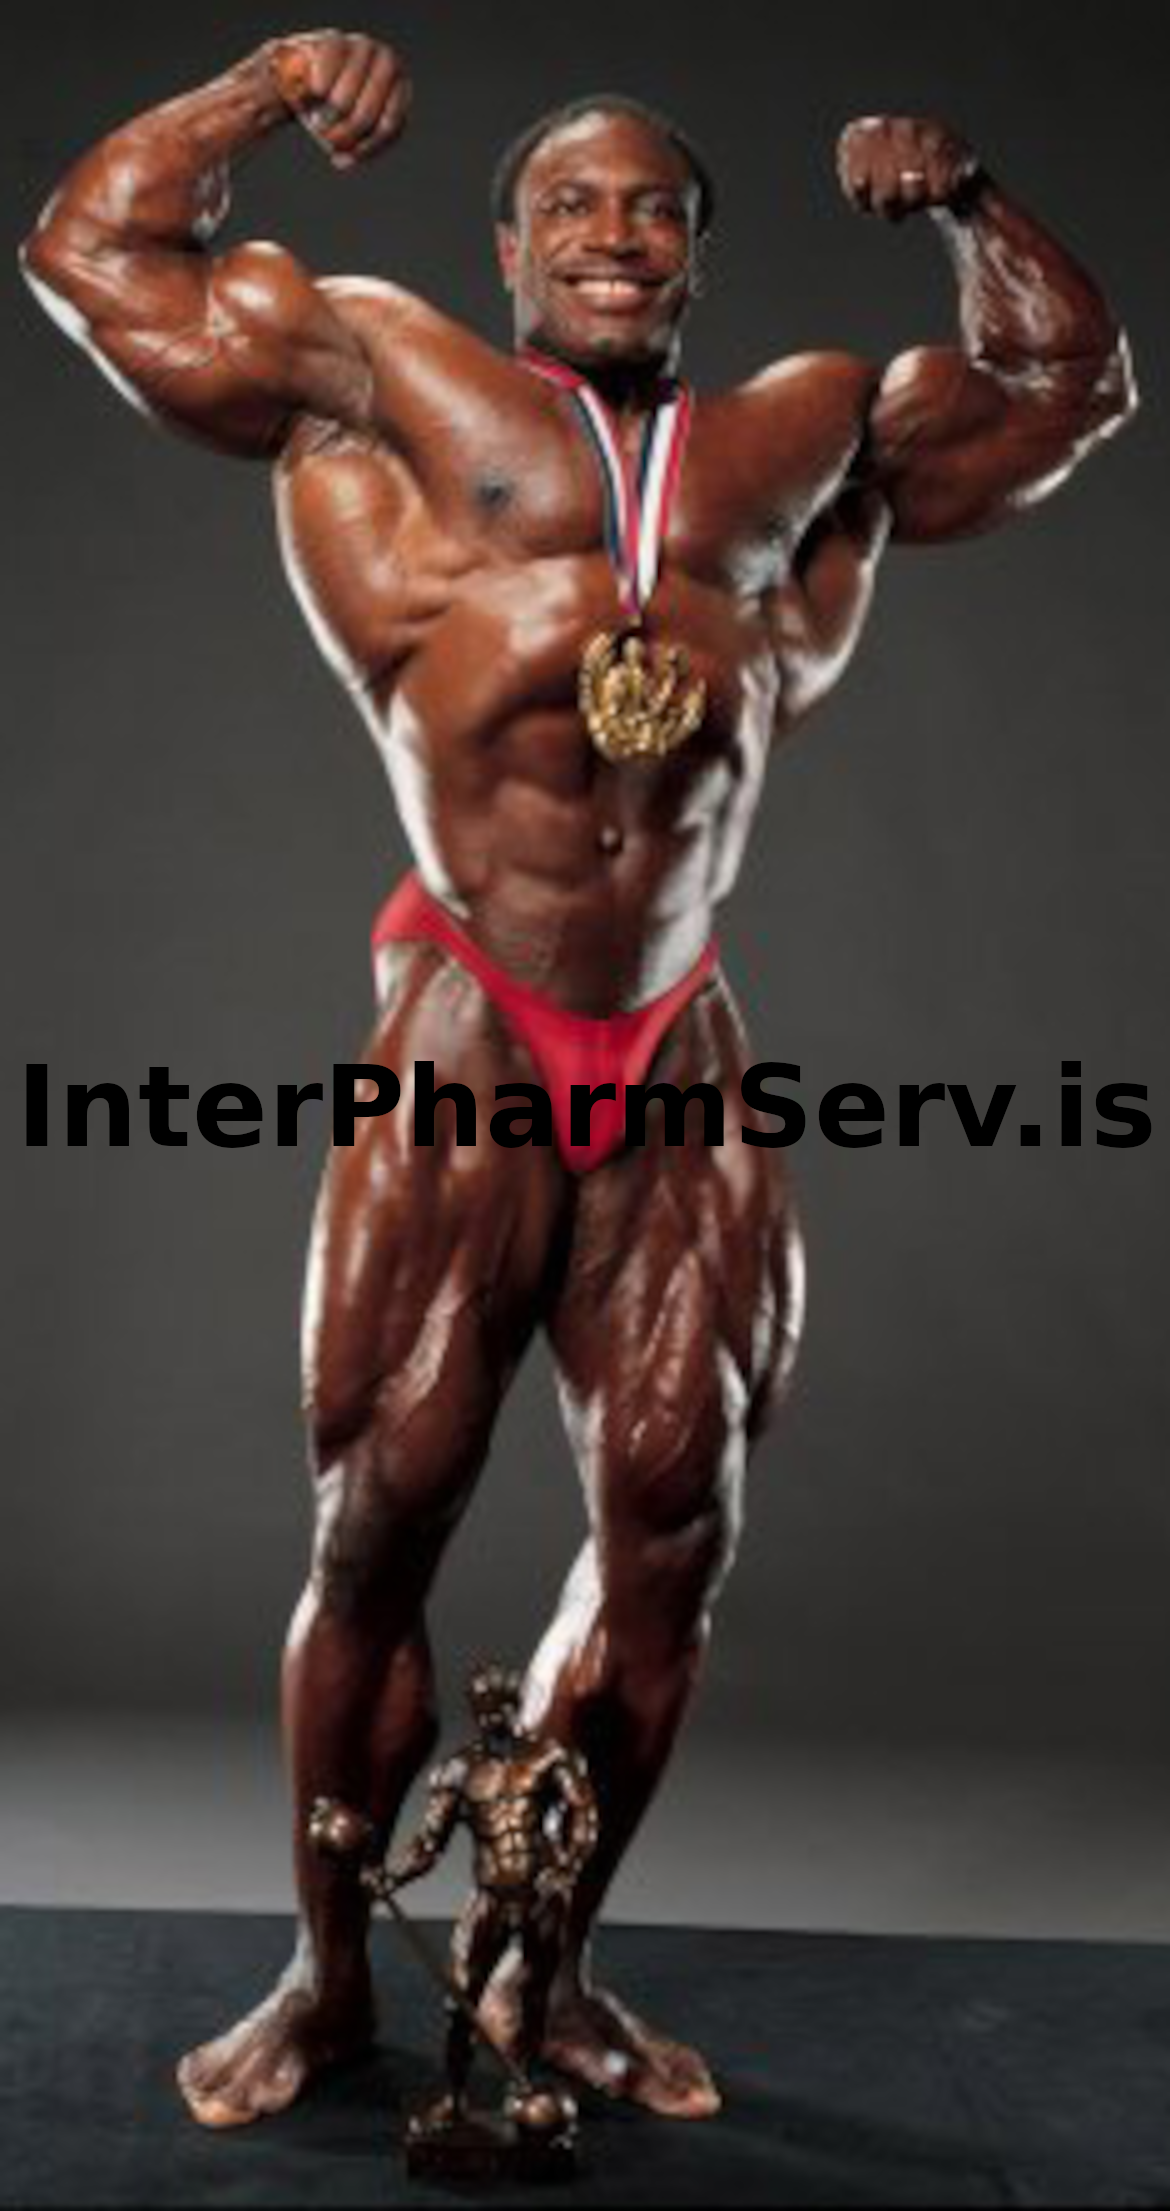 Lee Haney using steroid